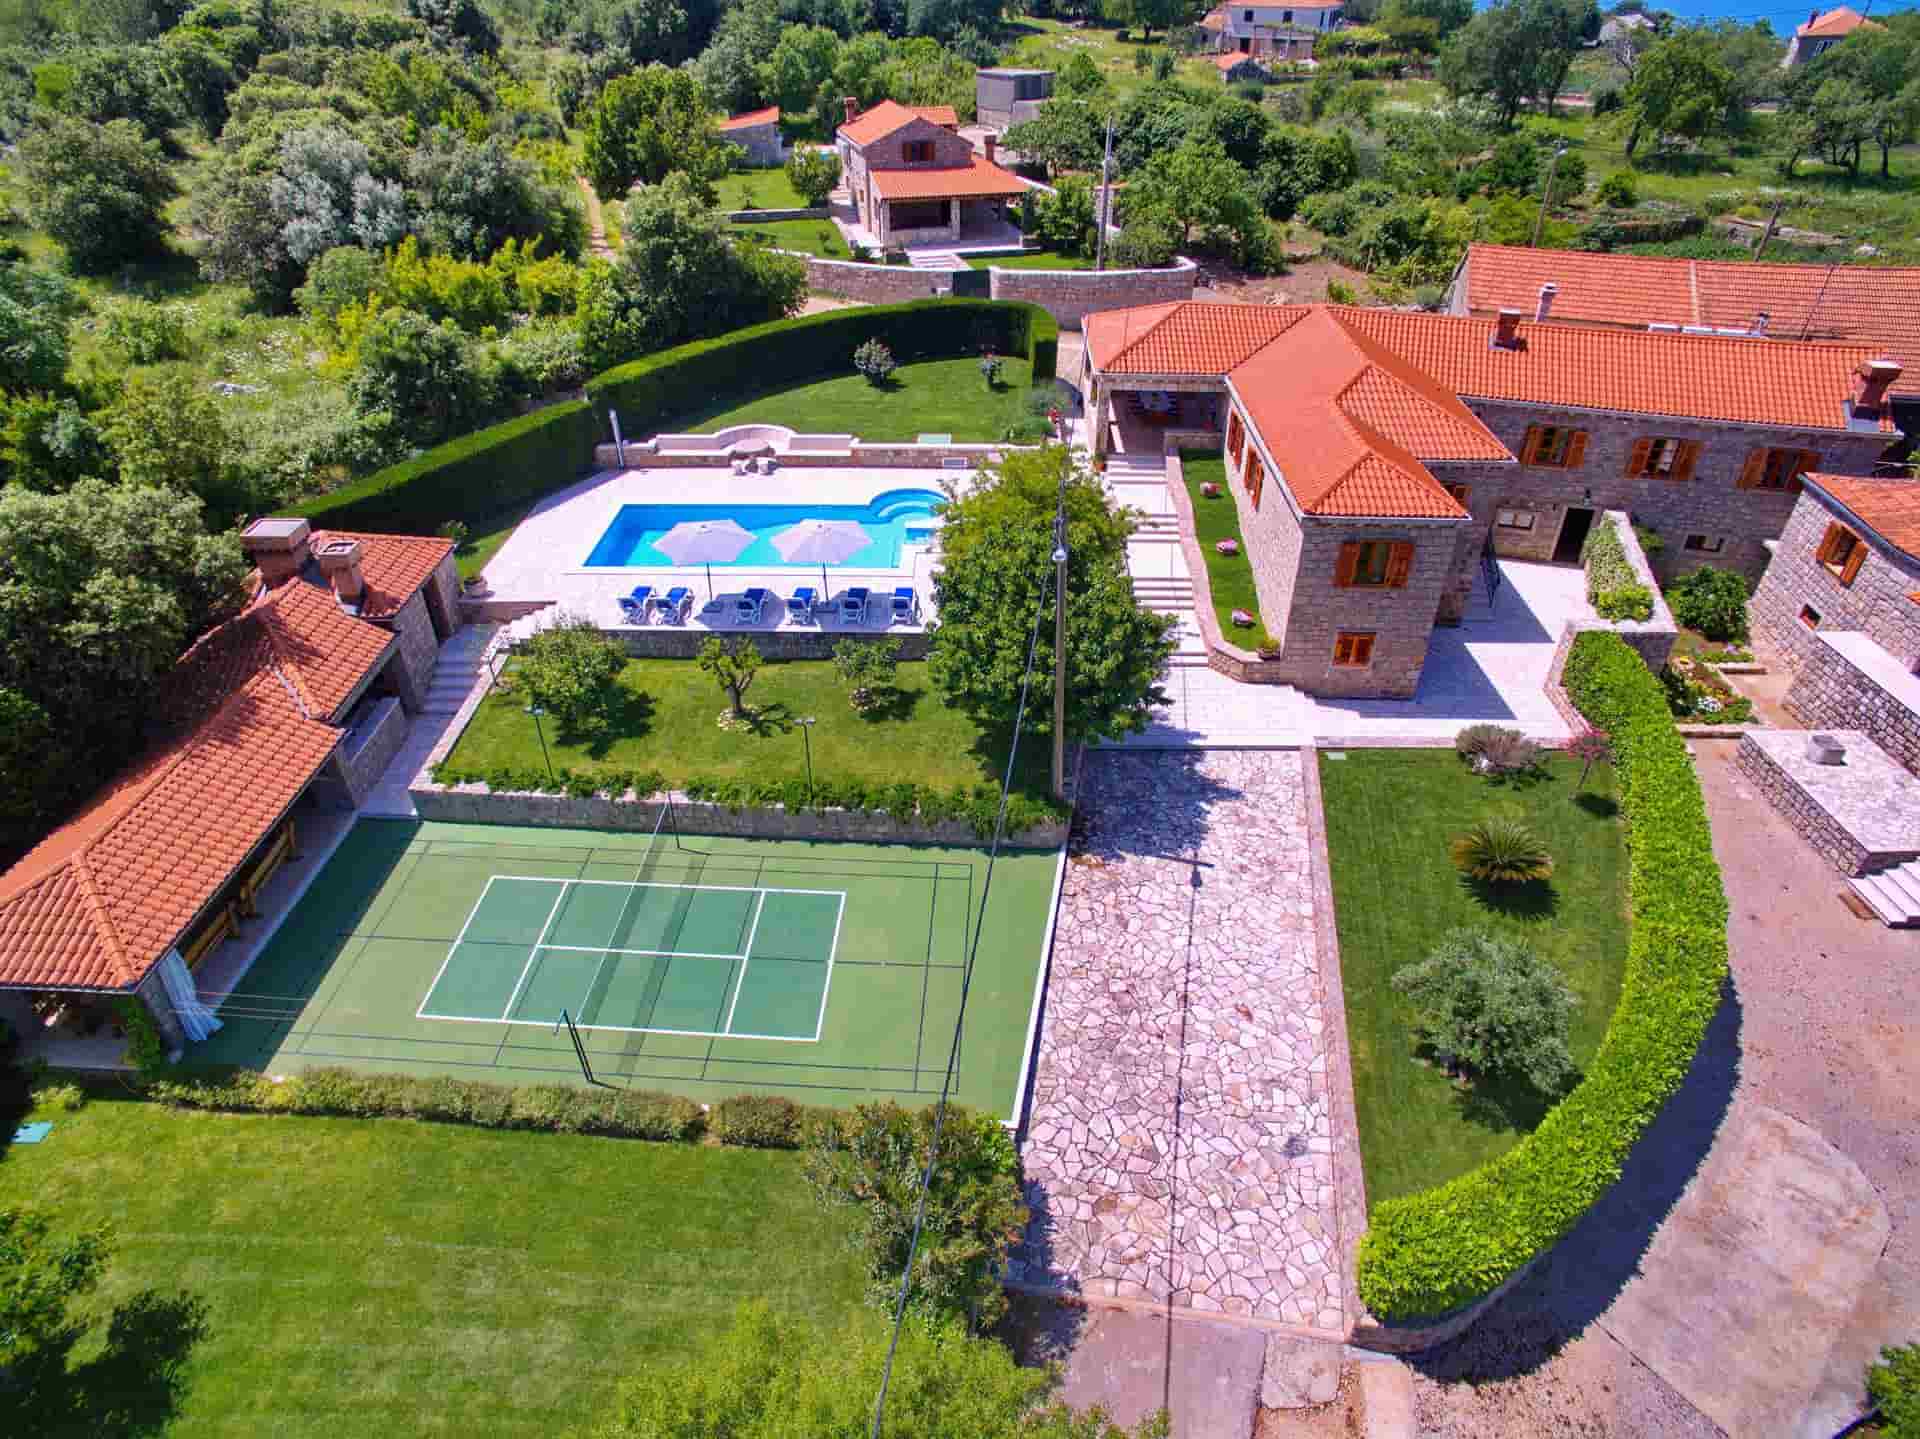 Luxury villa with pool and badminton court